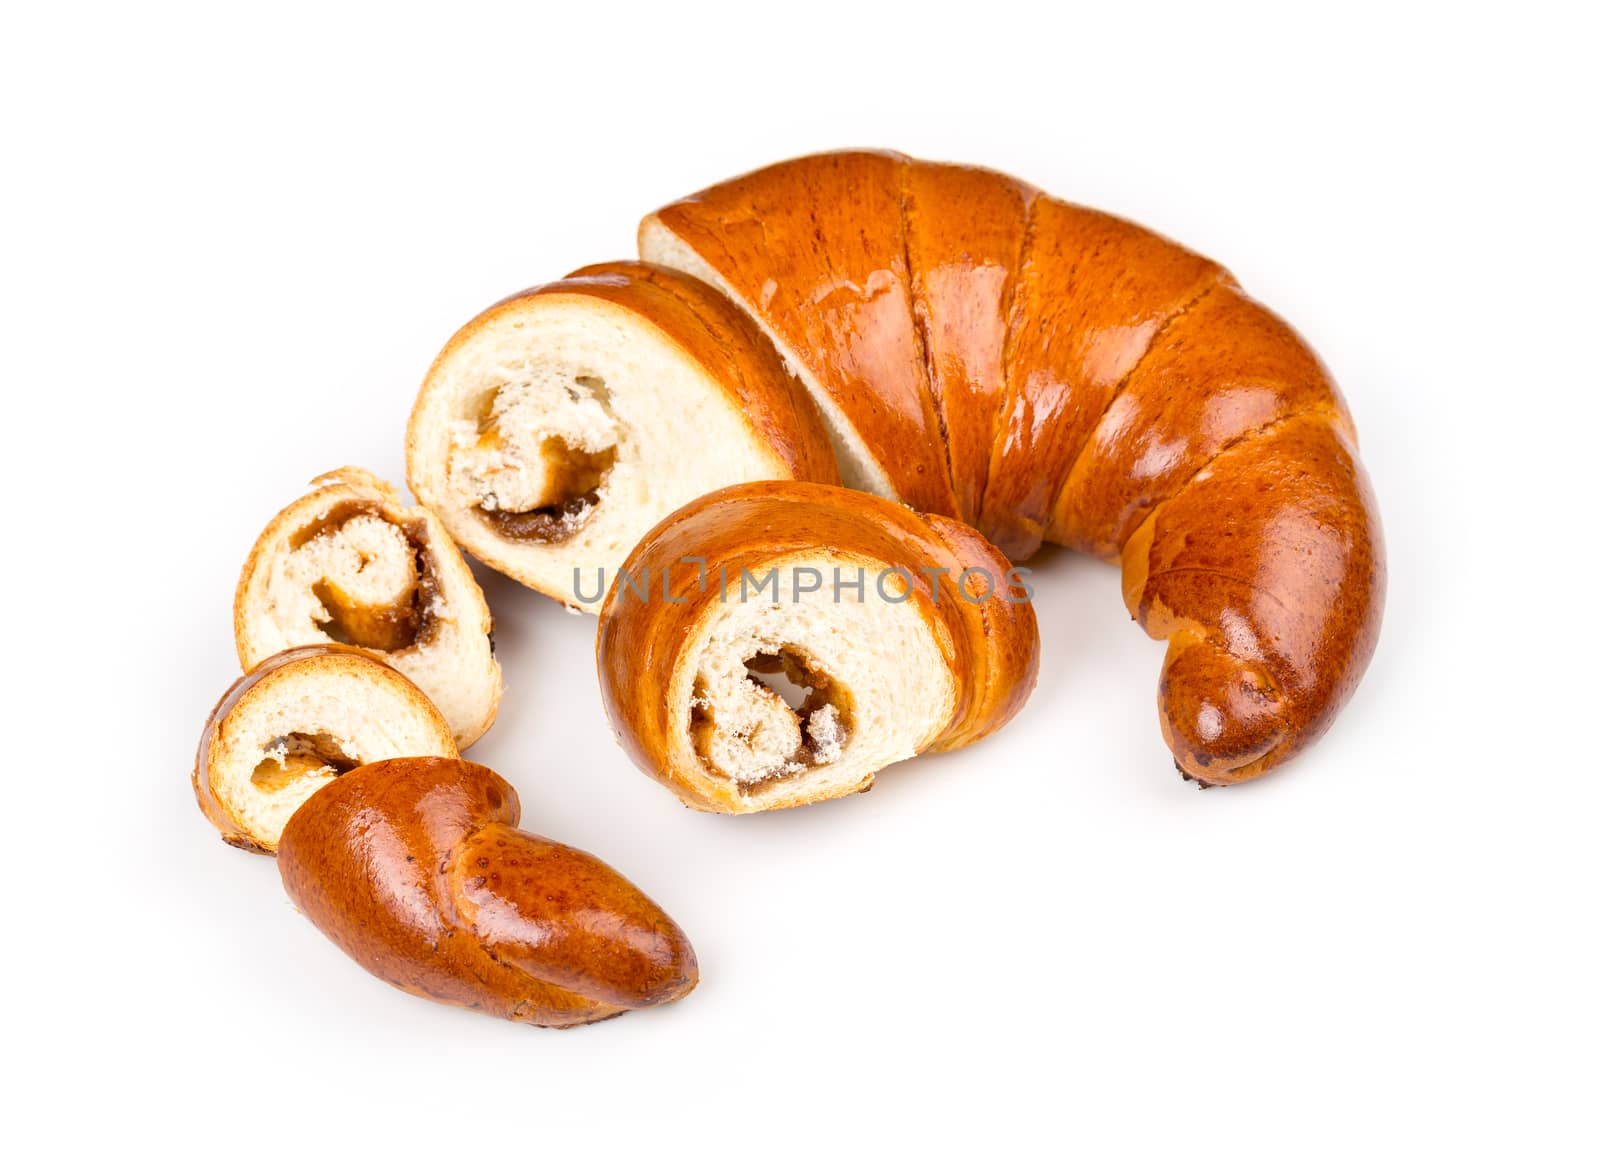 Fresh and tasty bagel with jam sliced pieces over white background